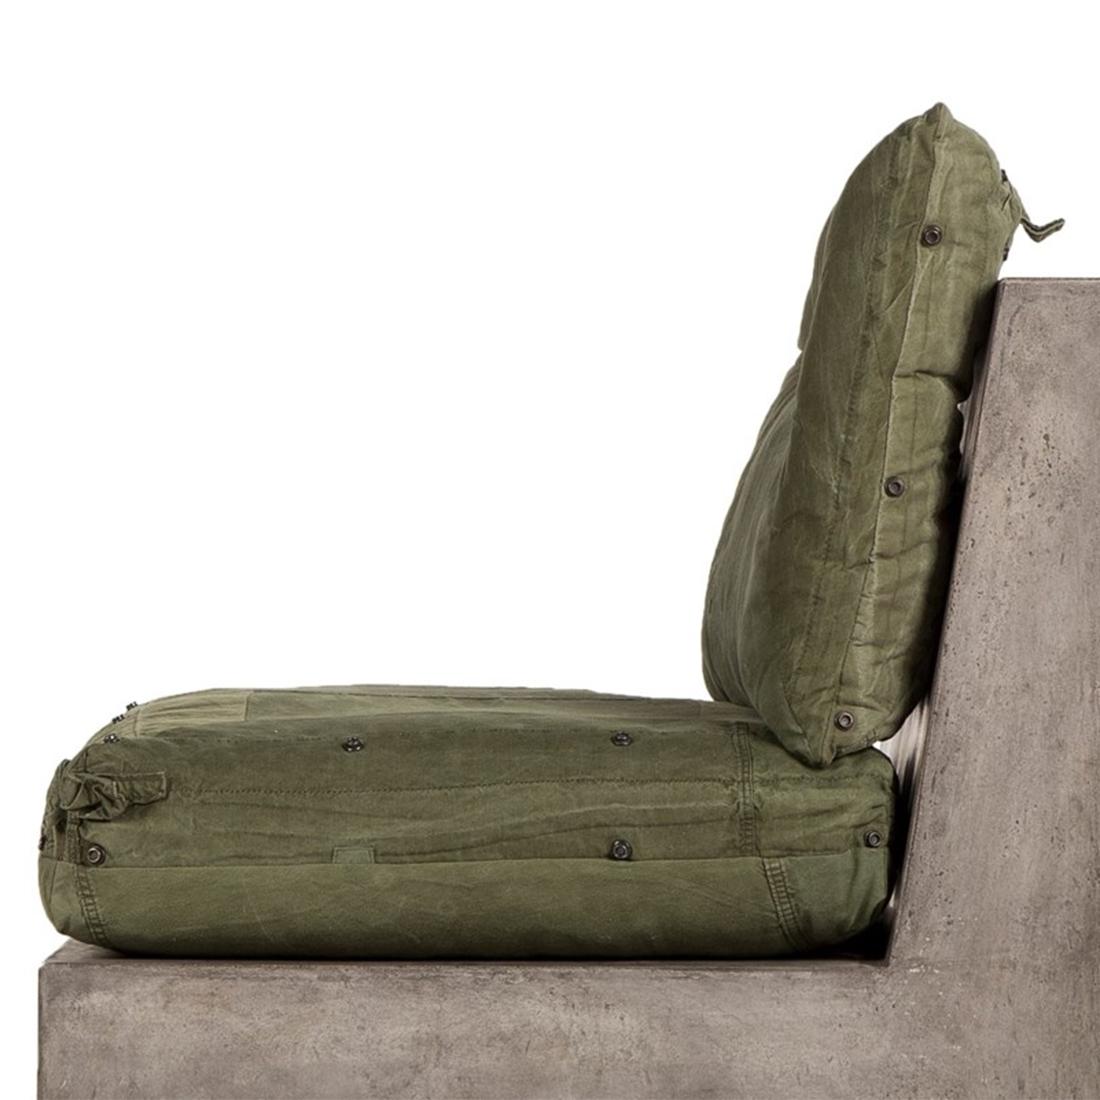 Contemporary Military Chair with Kaki Military Fabric